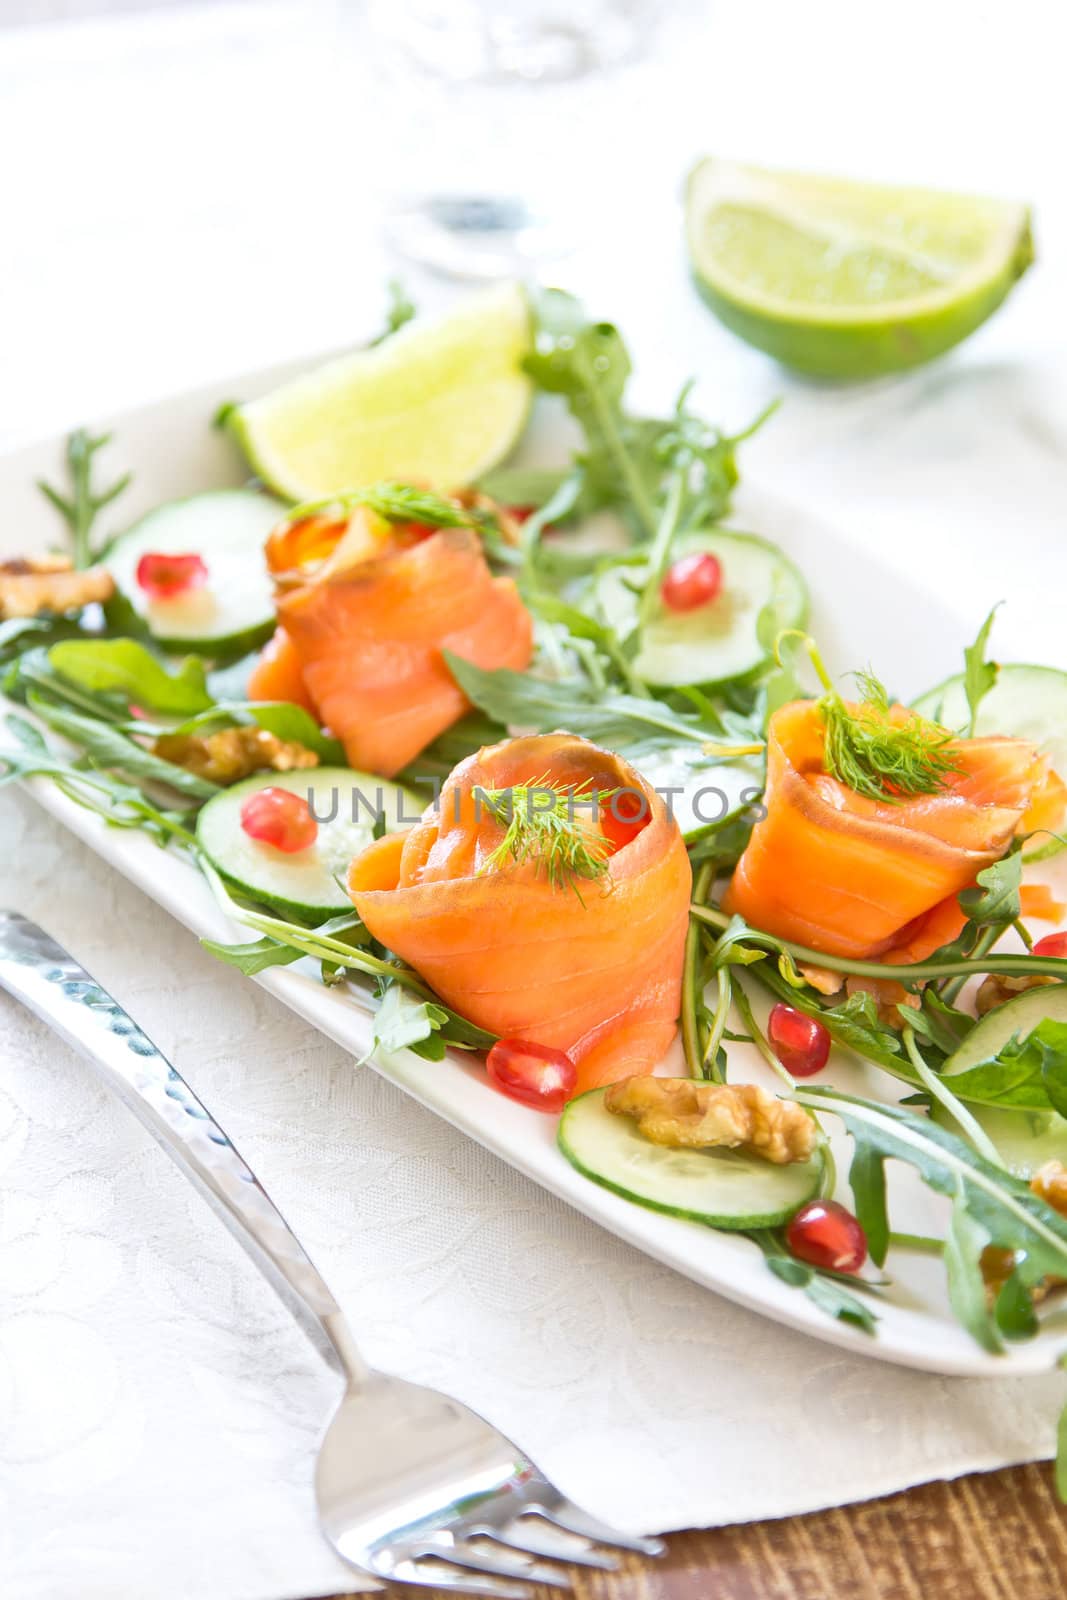 Smoked salmon with pomegranate and walnut salad by vanillaechoes